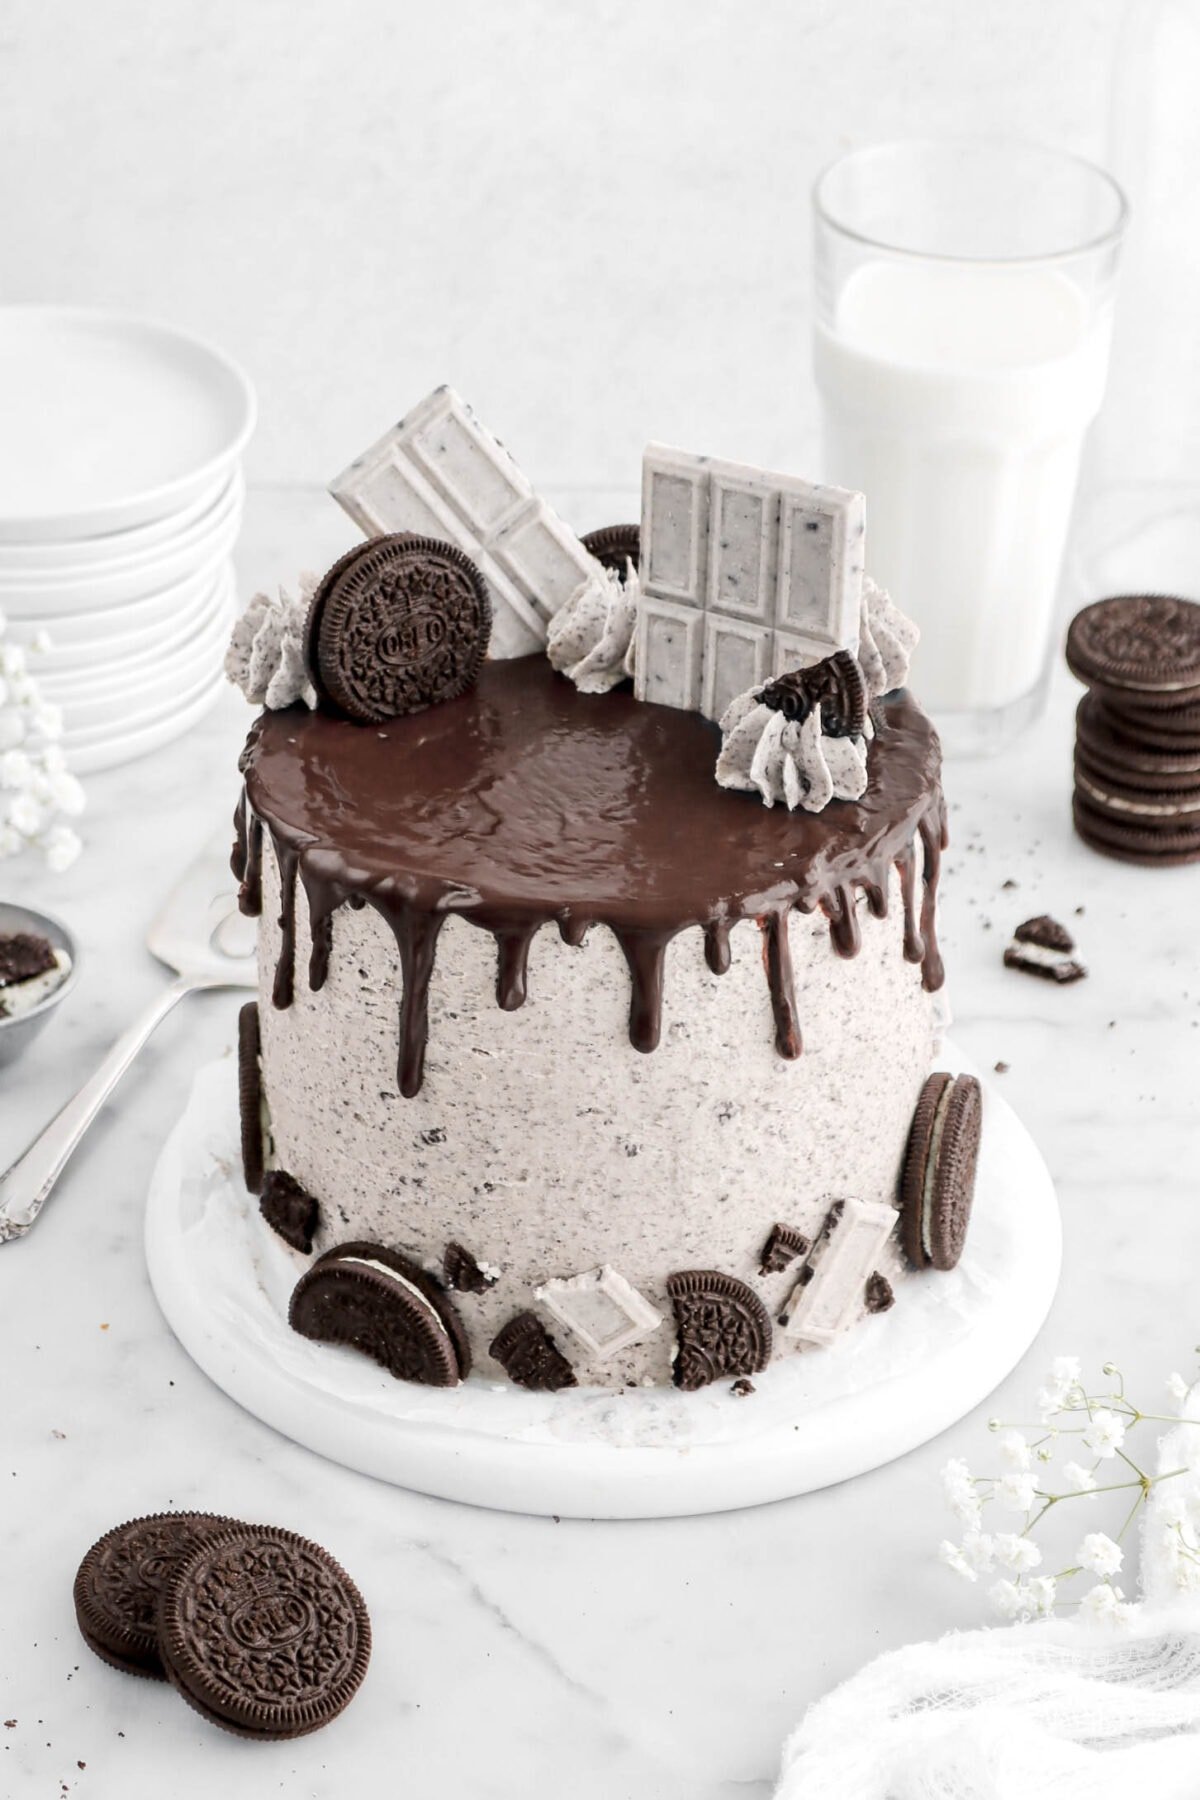 angled close up of oreo cake with chocolate drips, oreos, piped frosting, and cookies and cream candy bars on top, with more oreos surrounding cake, a cake knife beside, with white flowers around, and a glass of milk behind.